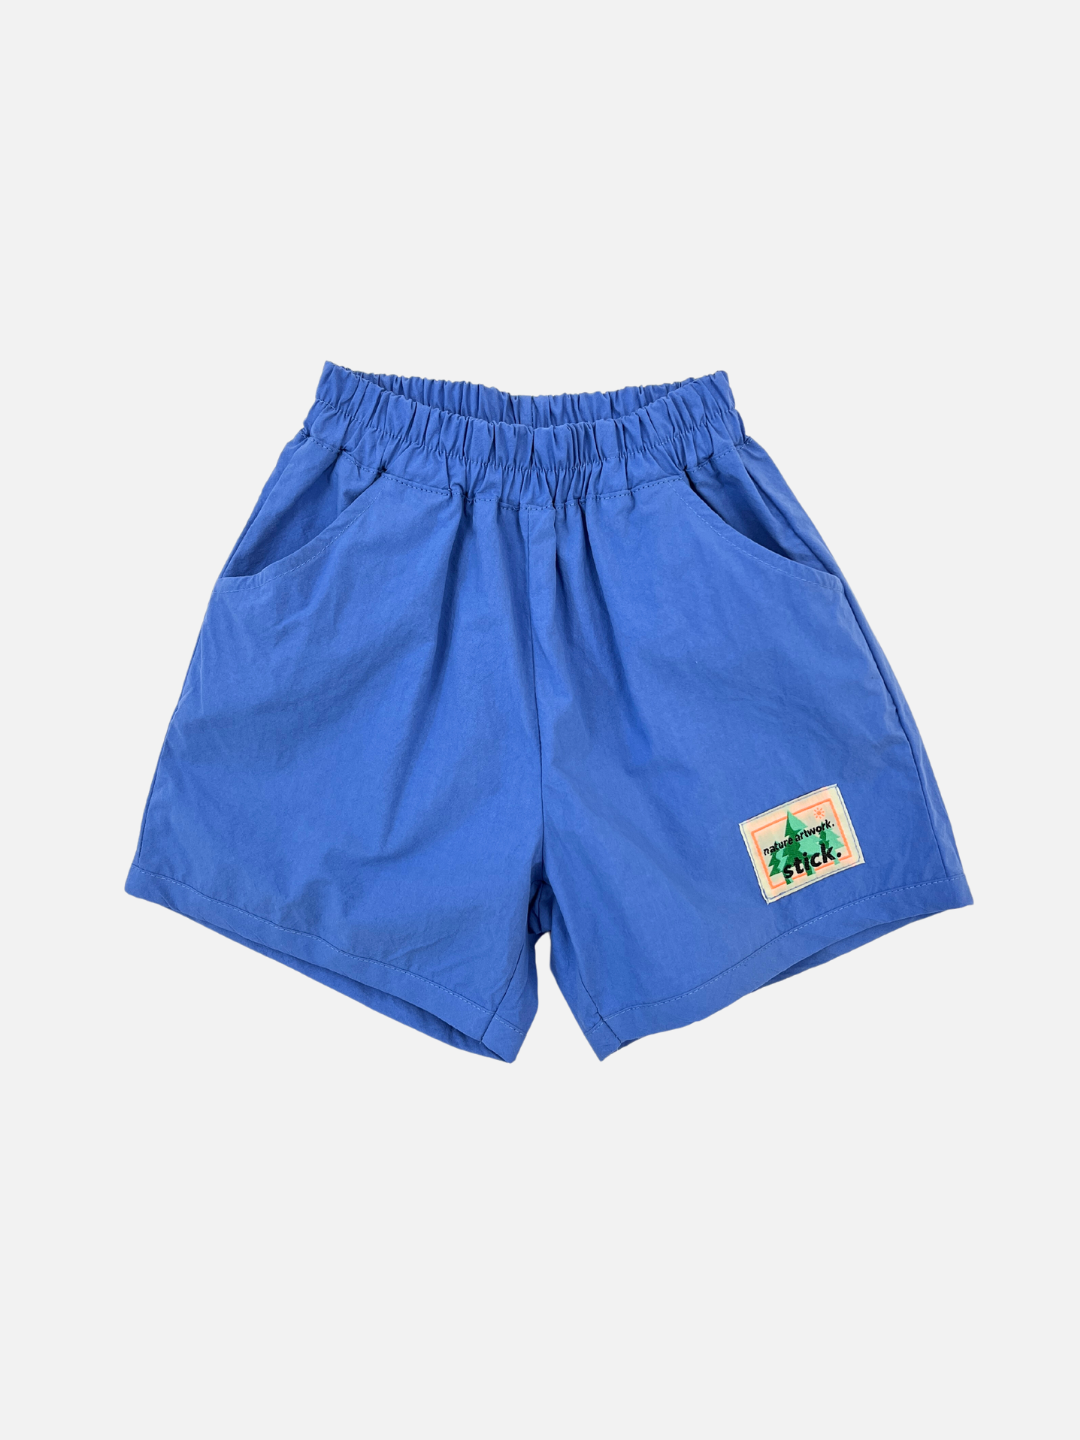 Blue kids' shorts front view.